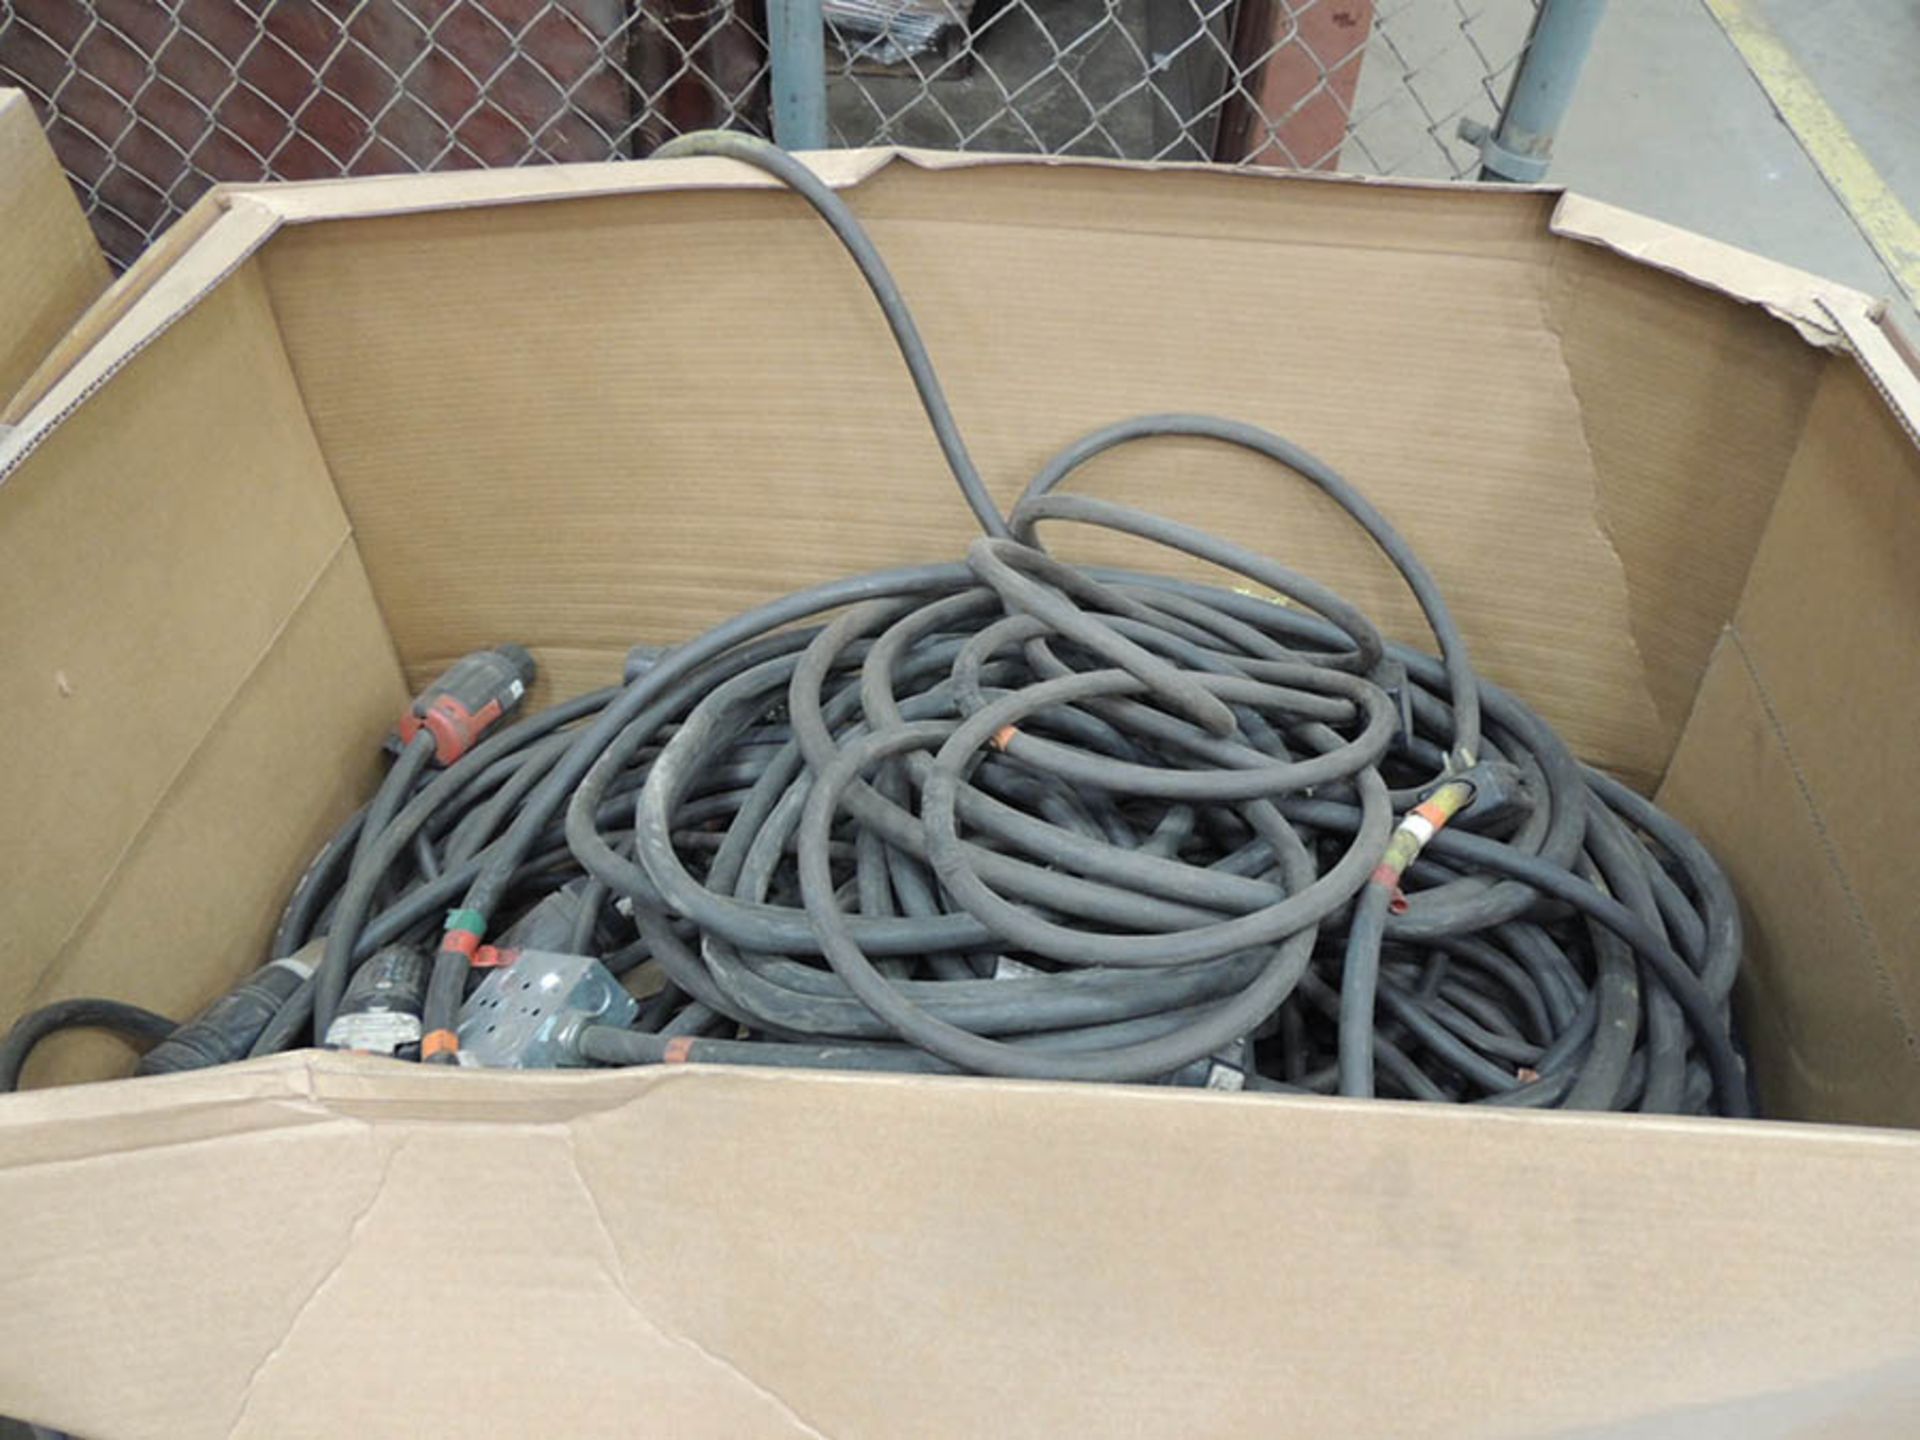 MISC. 250V. EXTENSION CORDS - Image 2 of 2